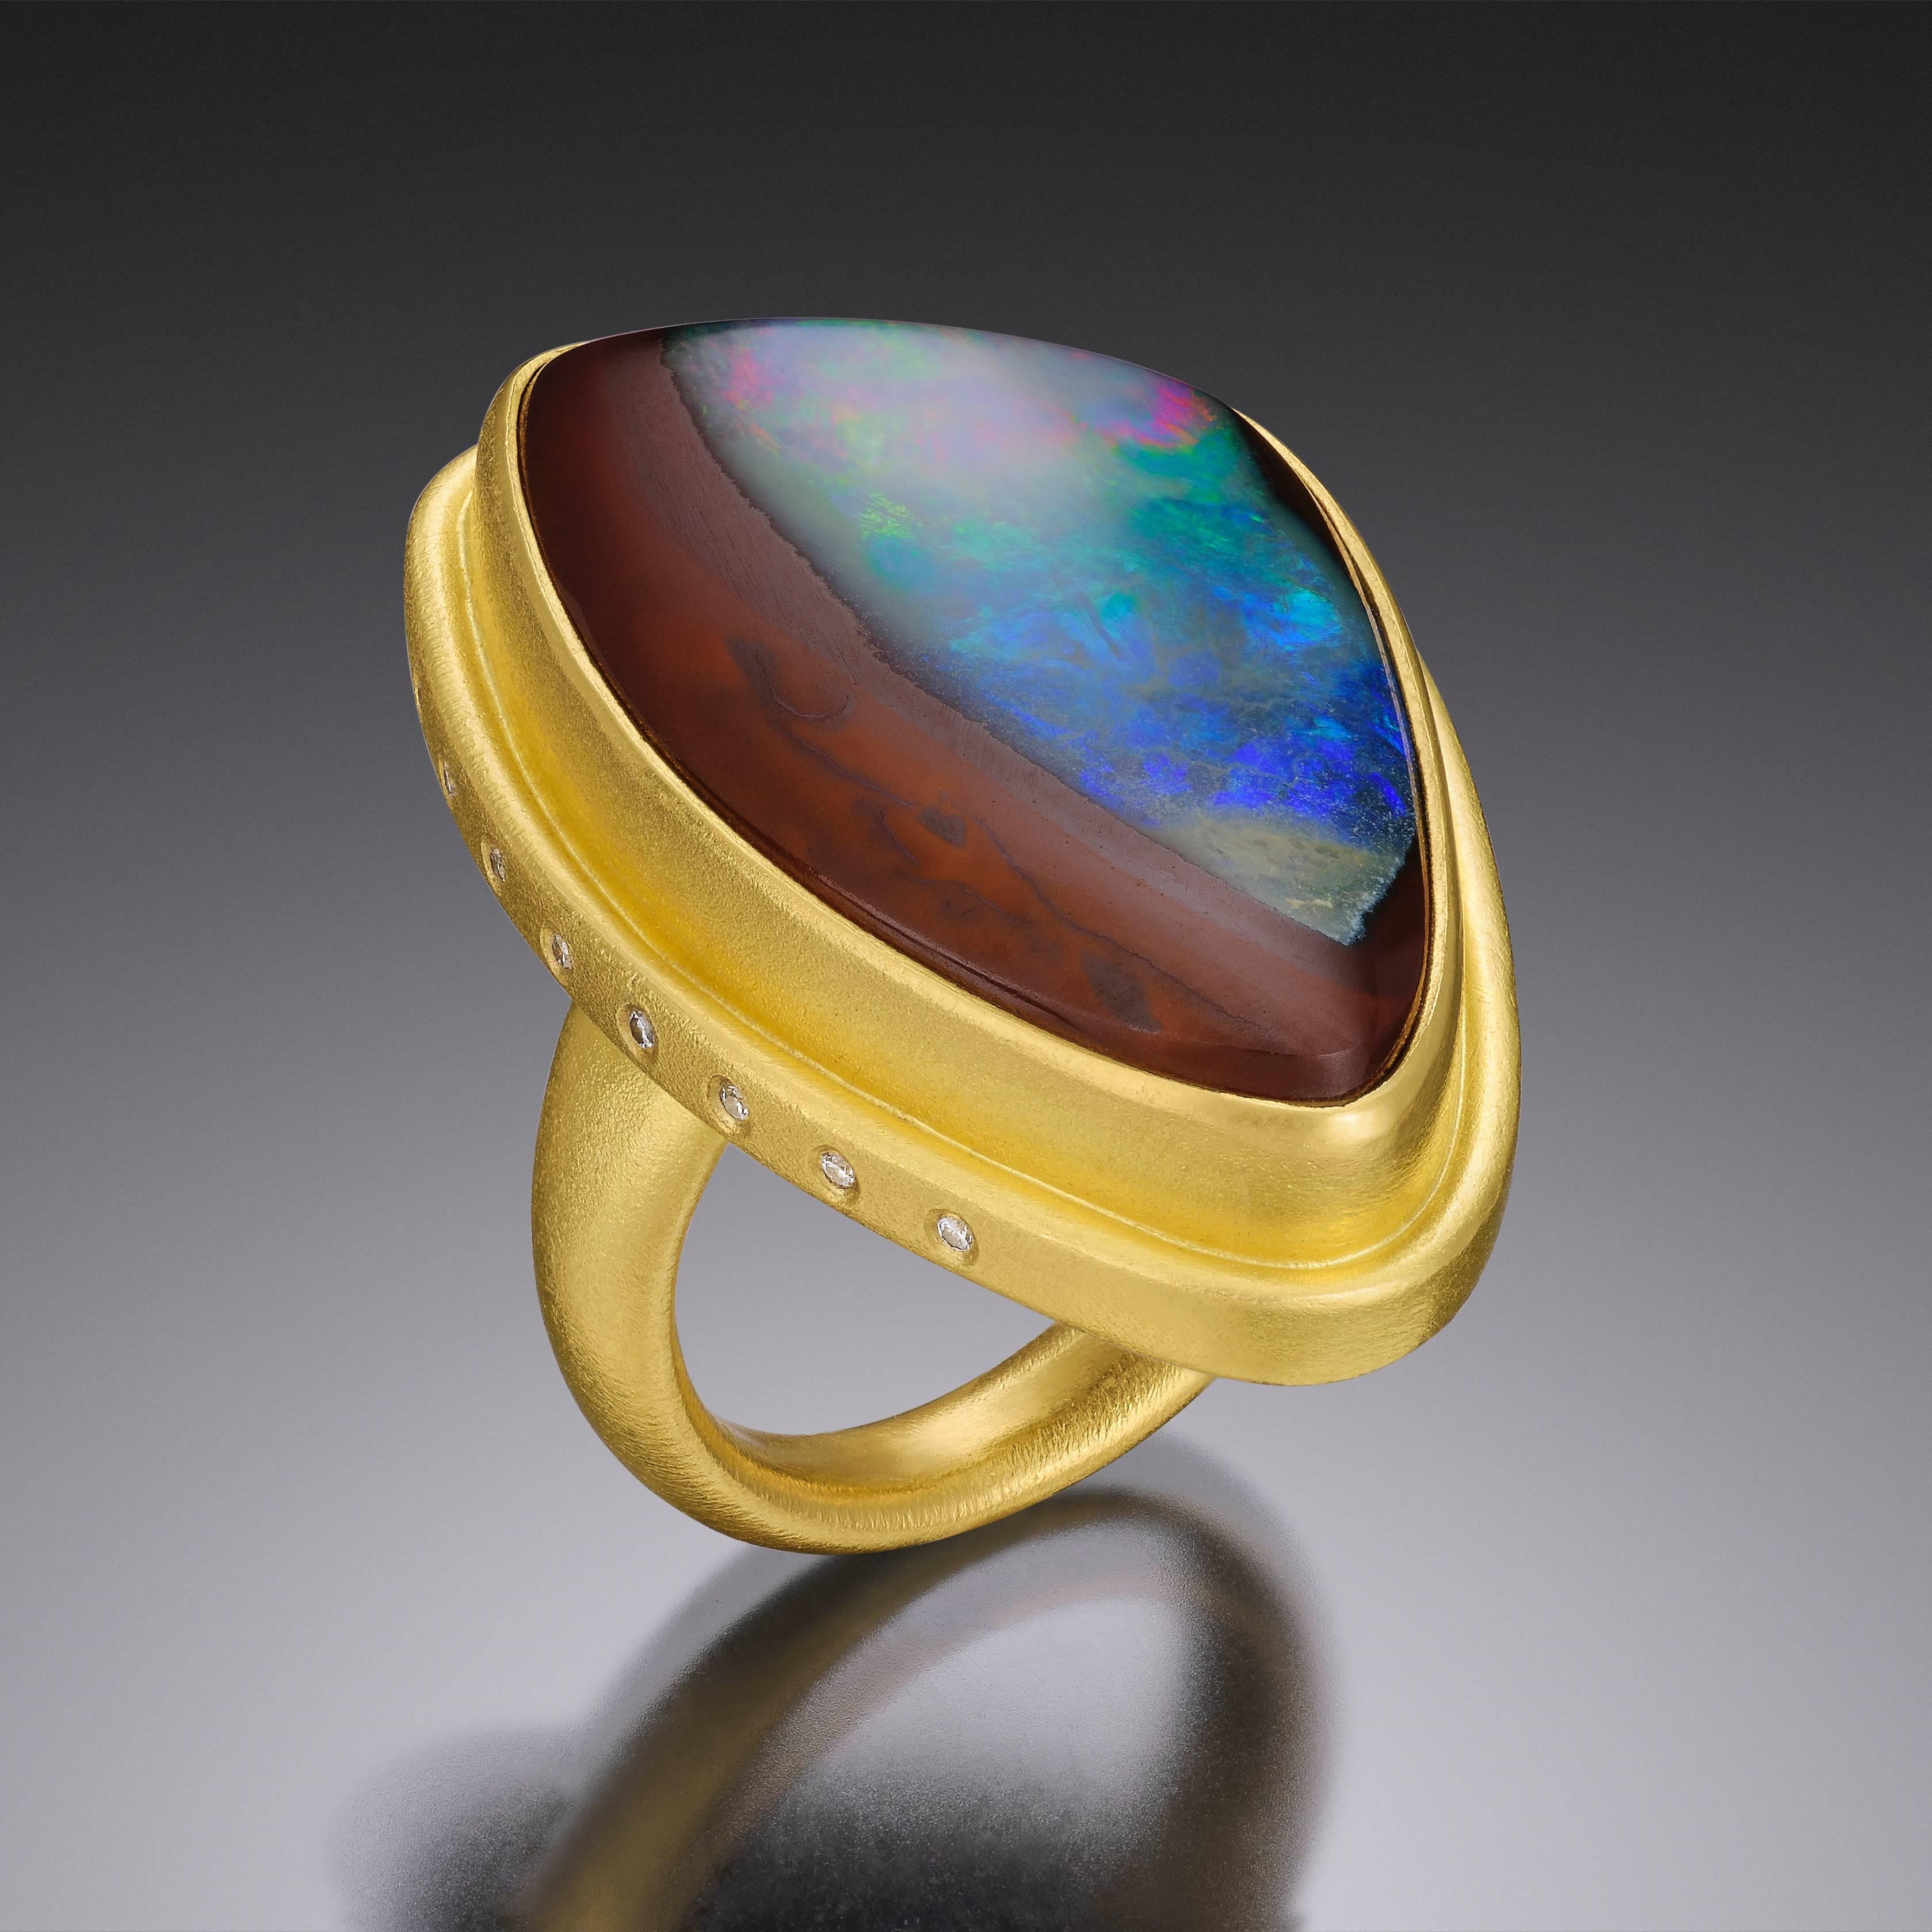 Handmade 22kt yellow Gold band set with Australian rainbow Boulder Opal and eight Fvs white Diamonds. 

* Each piece is designed and crafted entirely by hand in the traditional way, using age old techniques and processes.